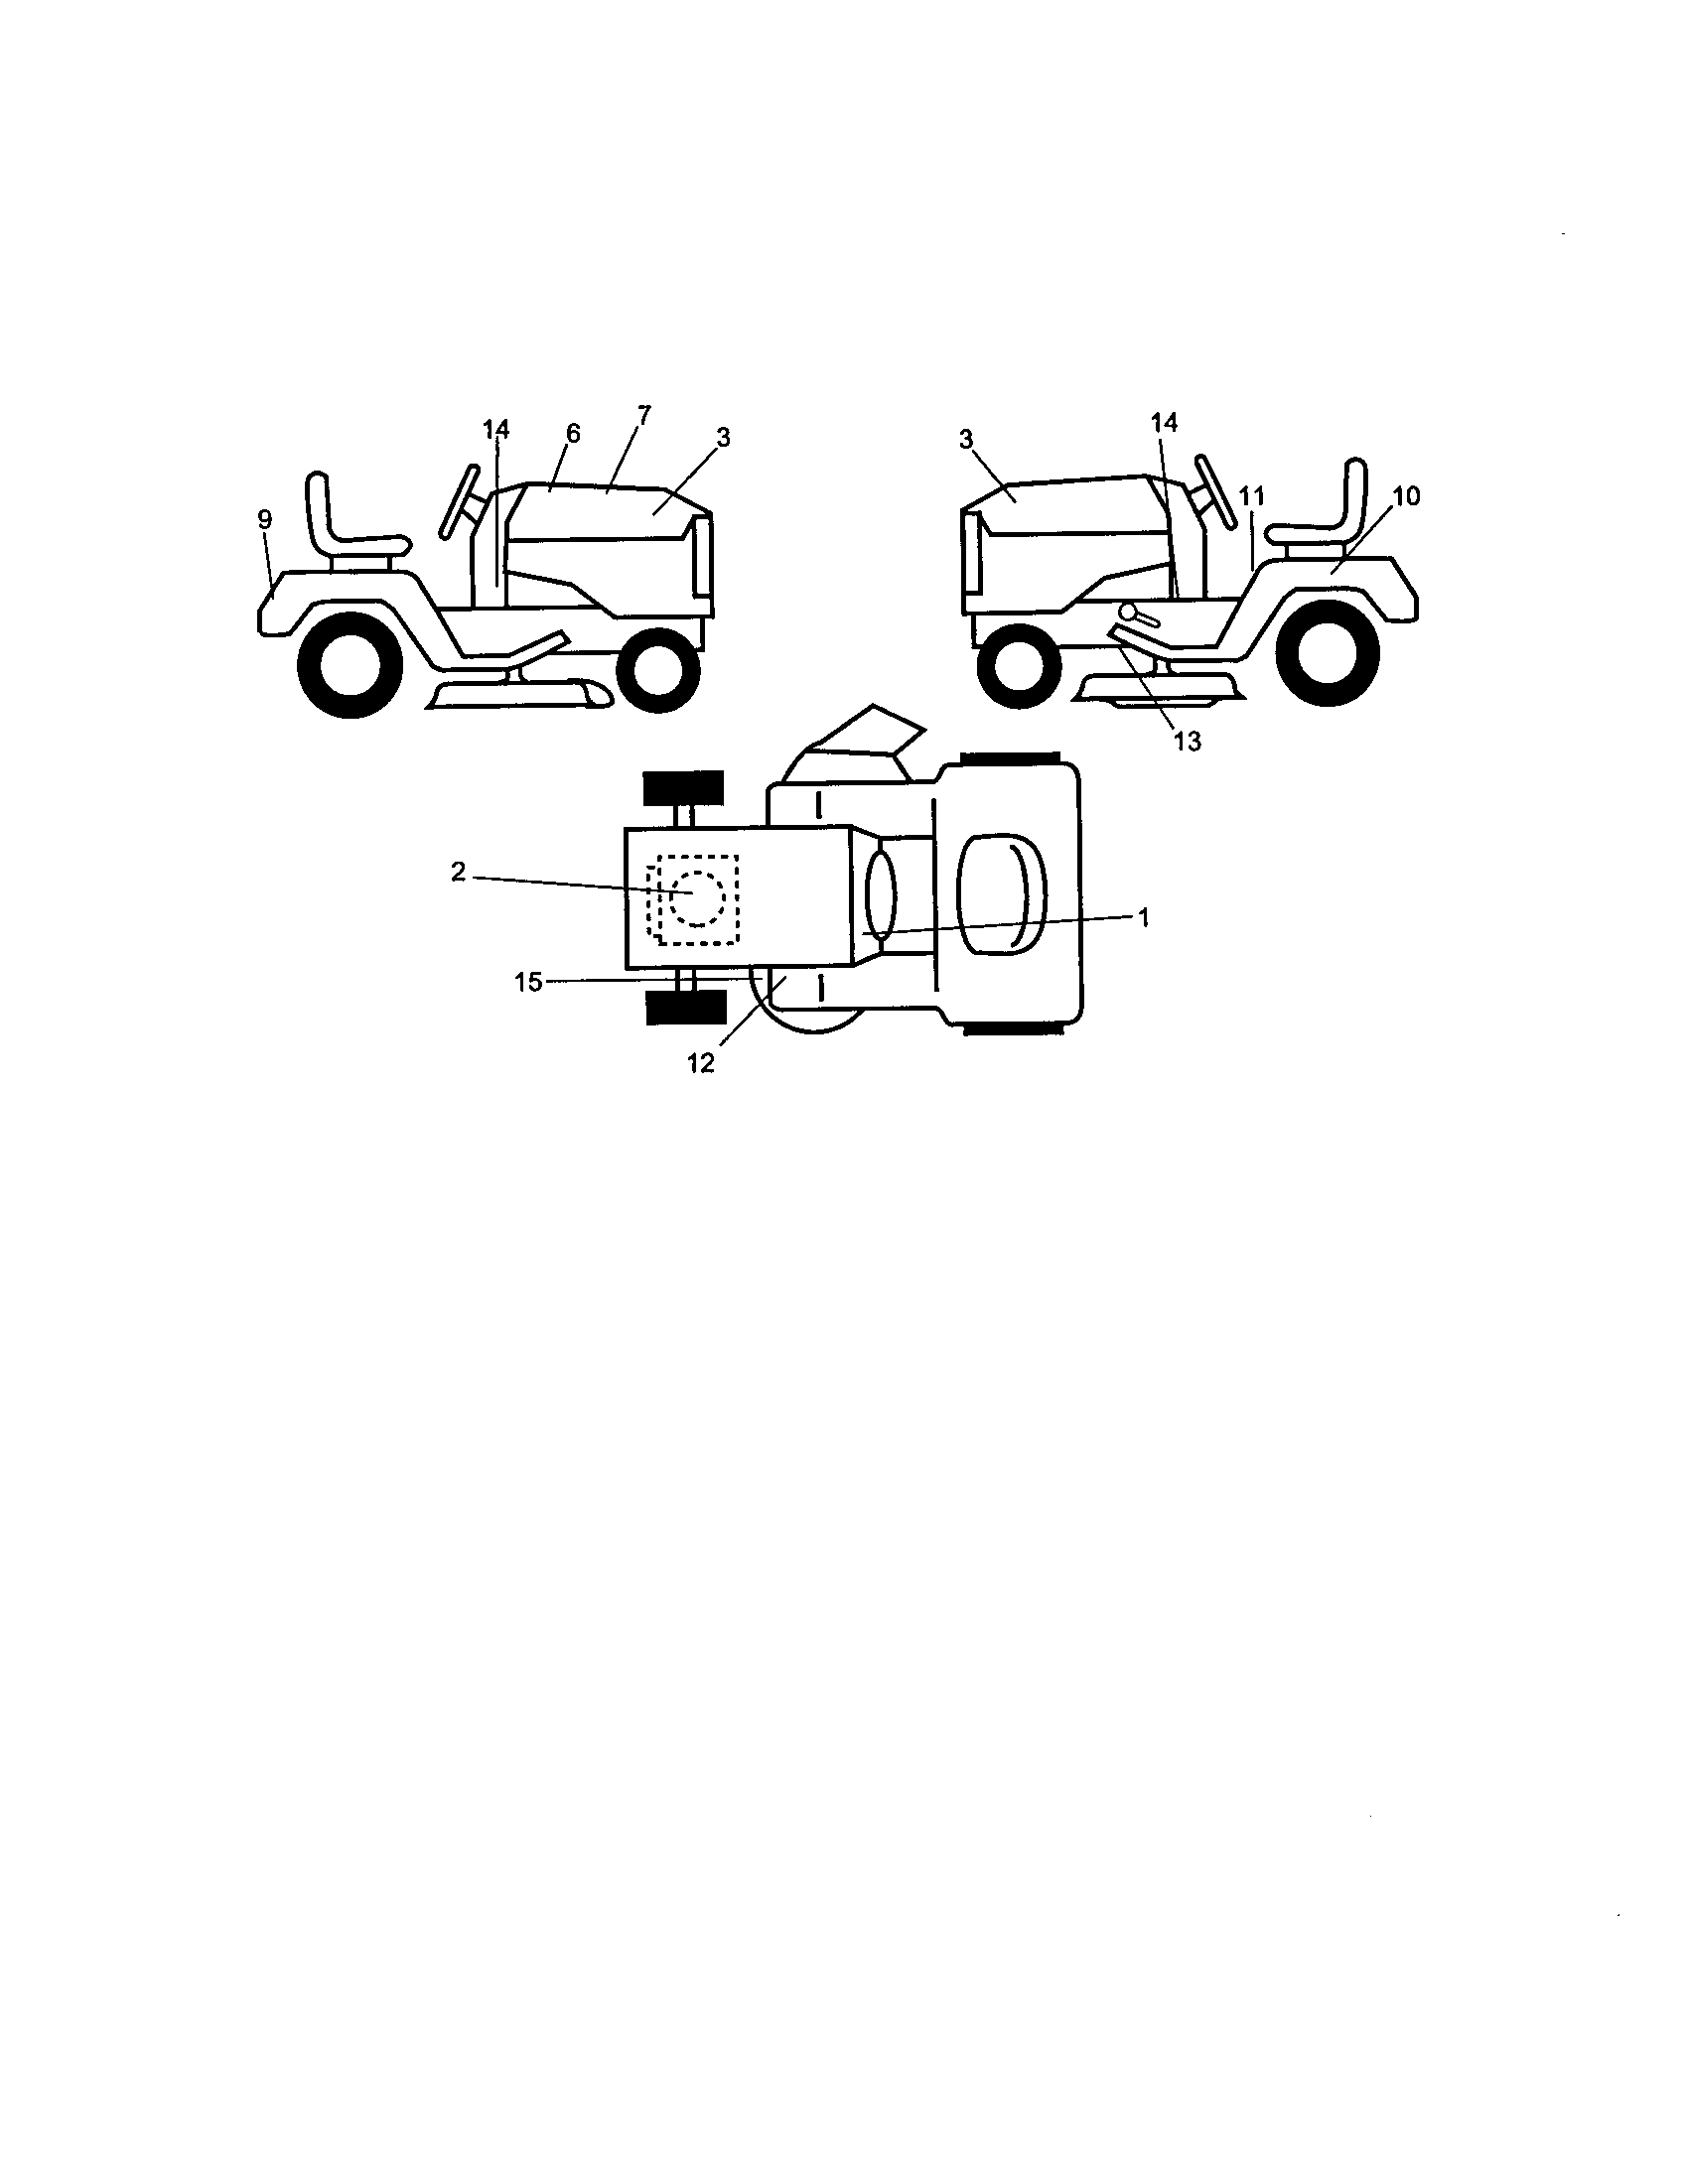 Craftsman Riding Lawn Mower Parts Diagram Looking For Craftsman Model 917271531 Front Engine Lawn Tractor